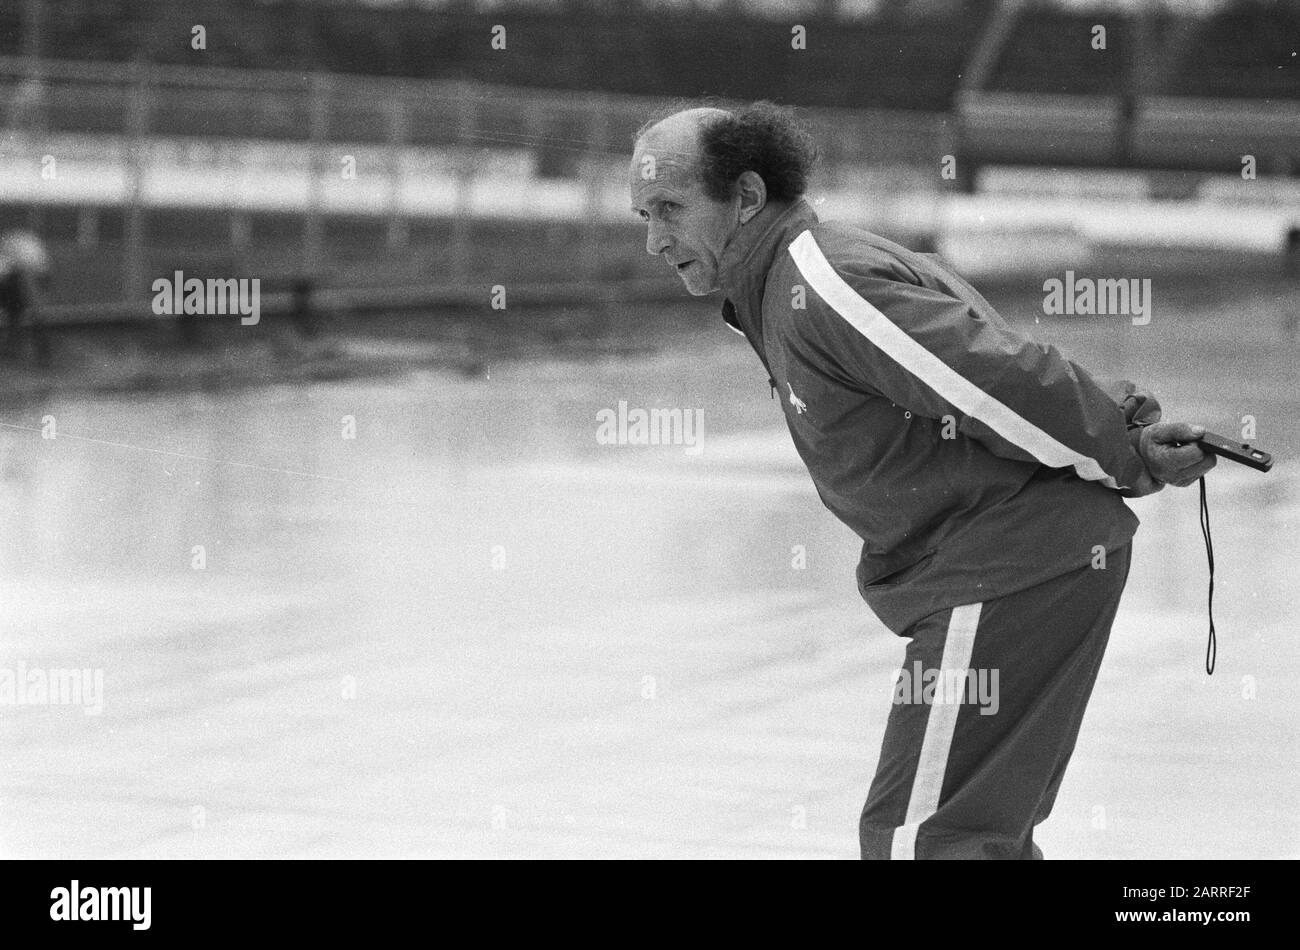 Ice skating competitions to the IJsselcup in Deventer. Coach of the national men's core team Egbert van't Oever in action. Date: 23 November 1980 Location: Deventer Keywords: skating, sport Person name: IJsselcup Institution name: Oever, Egbert van't Stock Photo